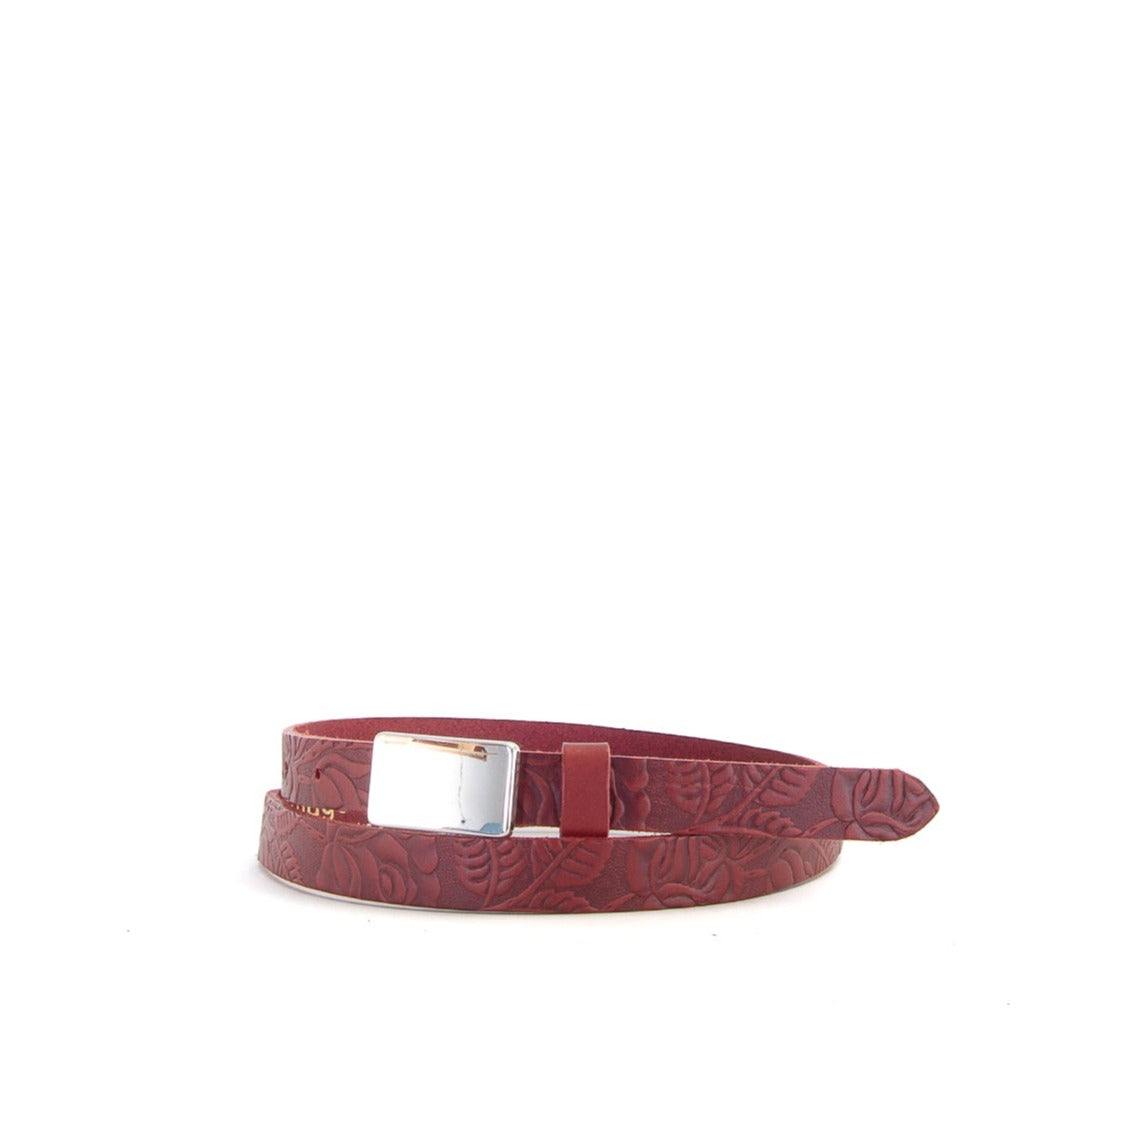 Embossed Burgundy Leather Belt with Plate | 3/4" Wide | 36" - 39"